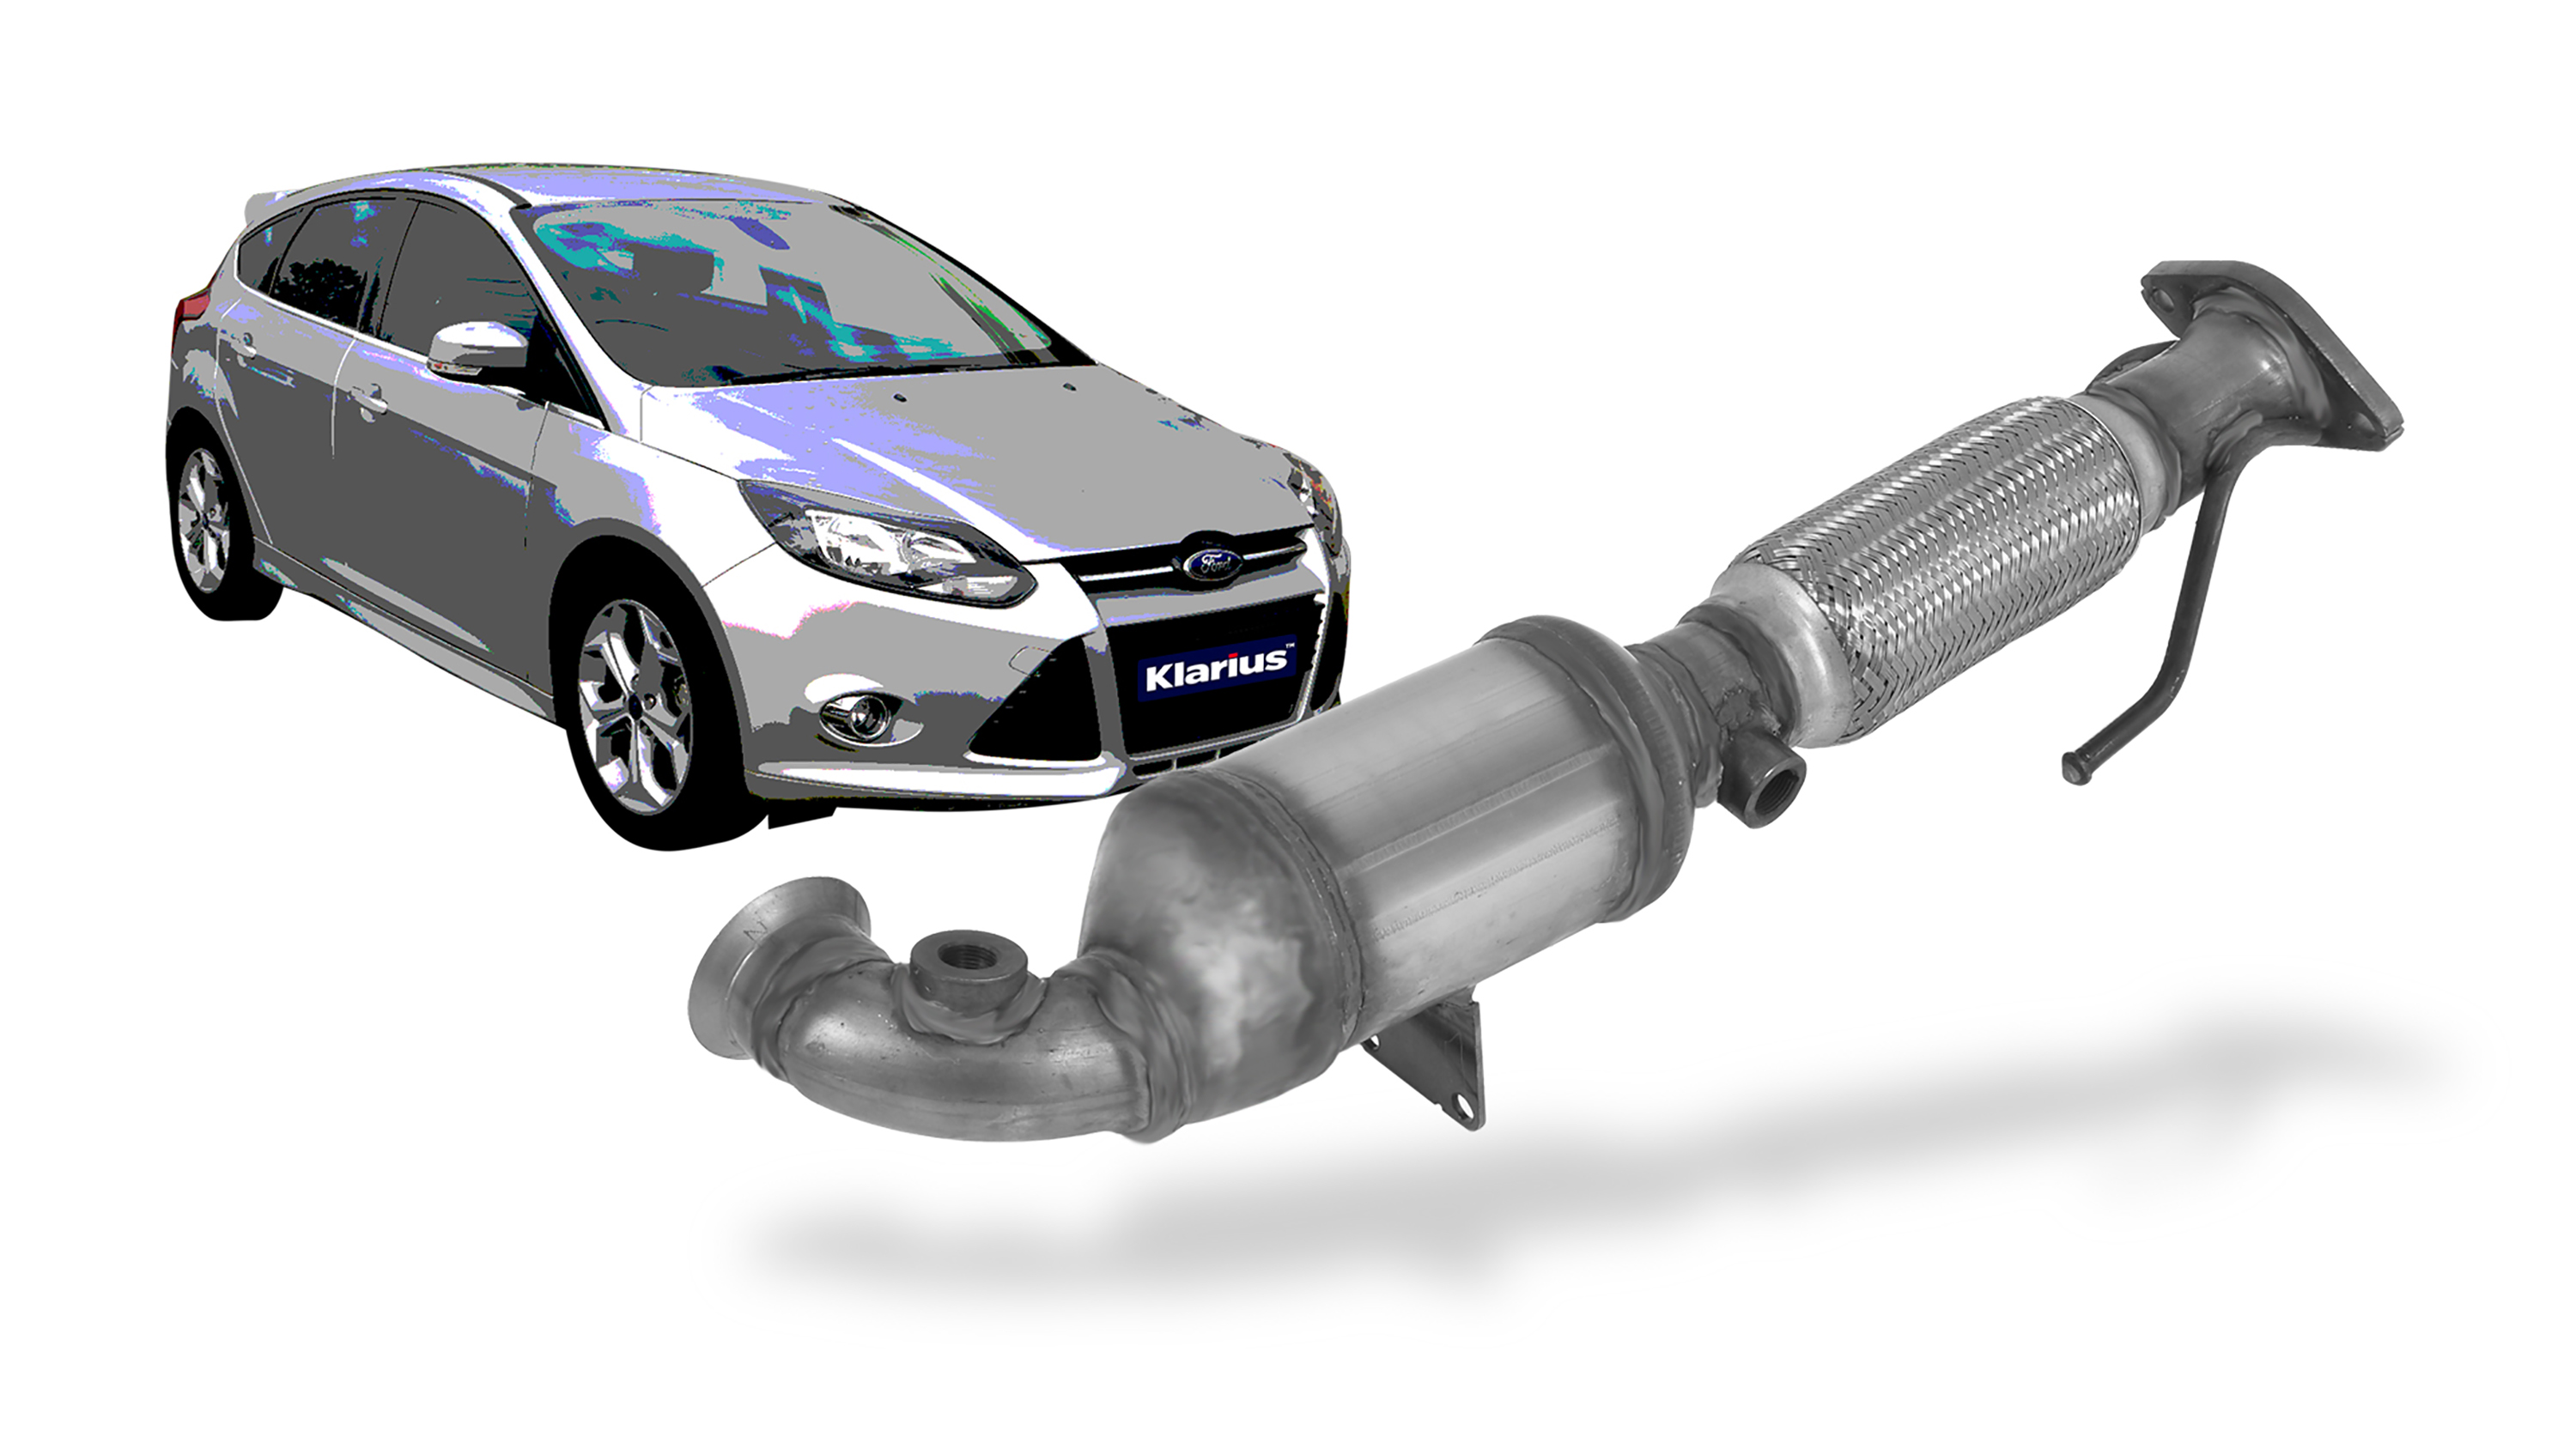 Klarius has added 33 new products to its emissions control range, including parts for multiple models of the Ford Focus.